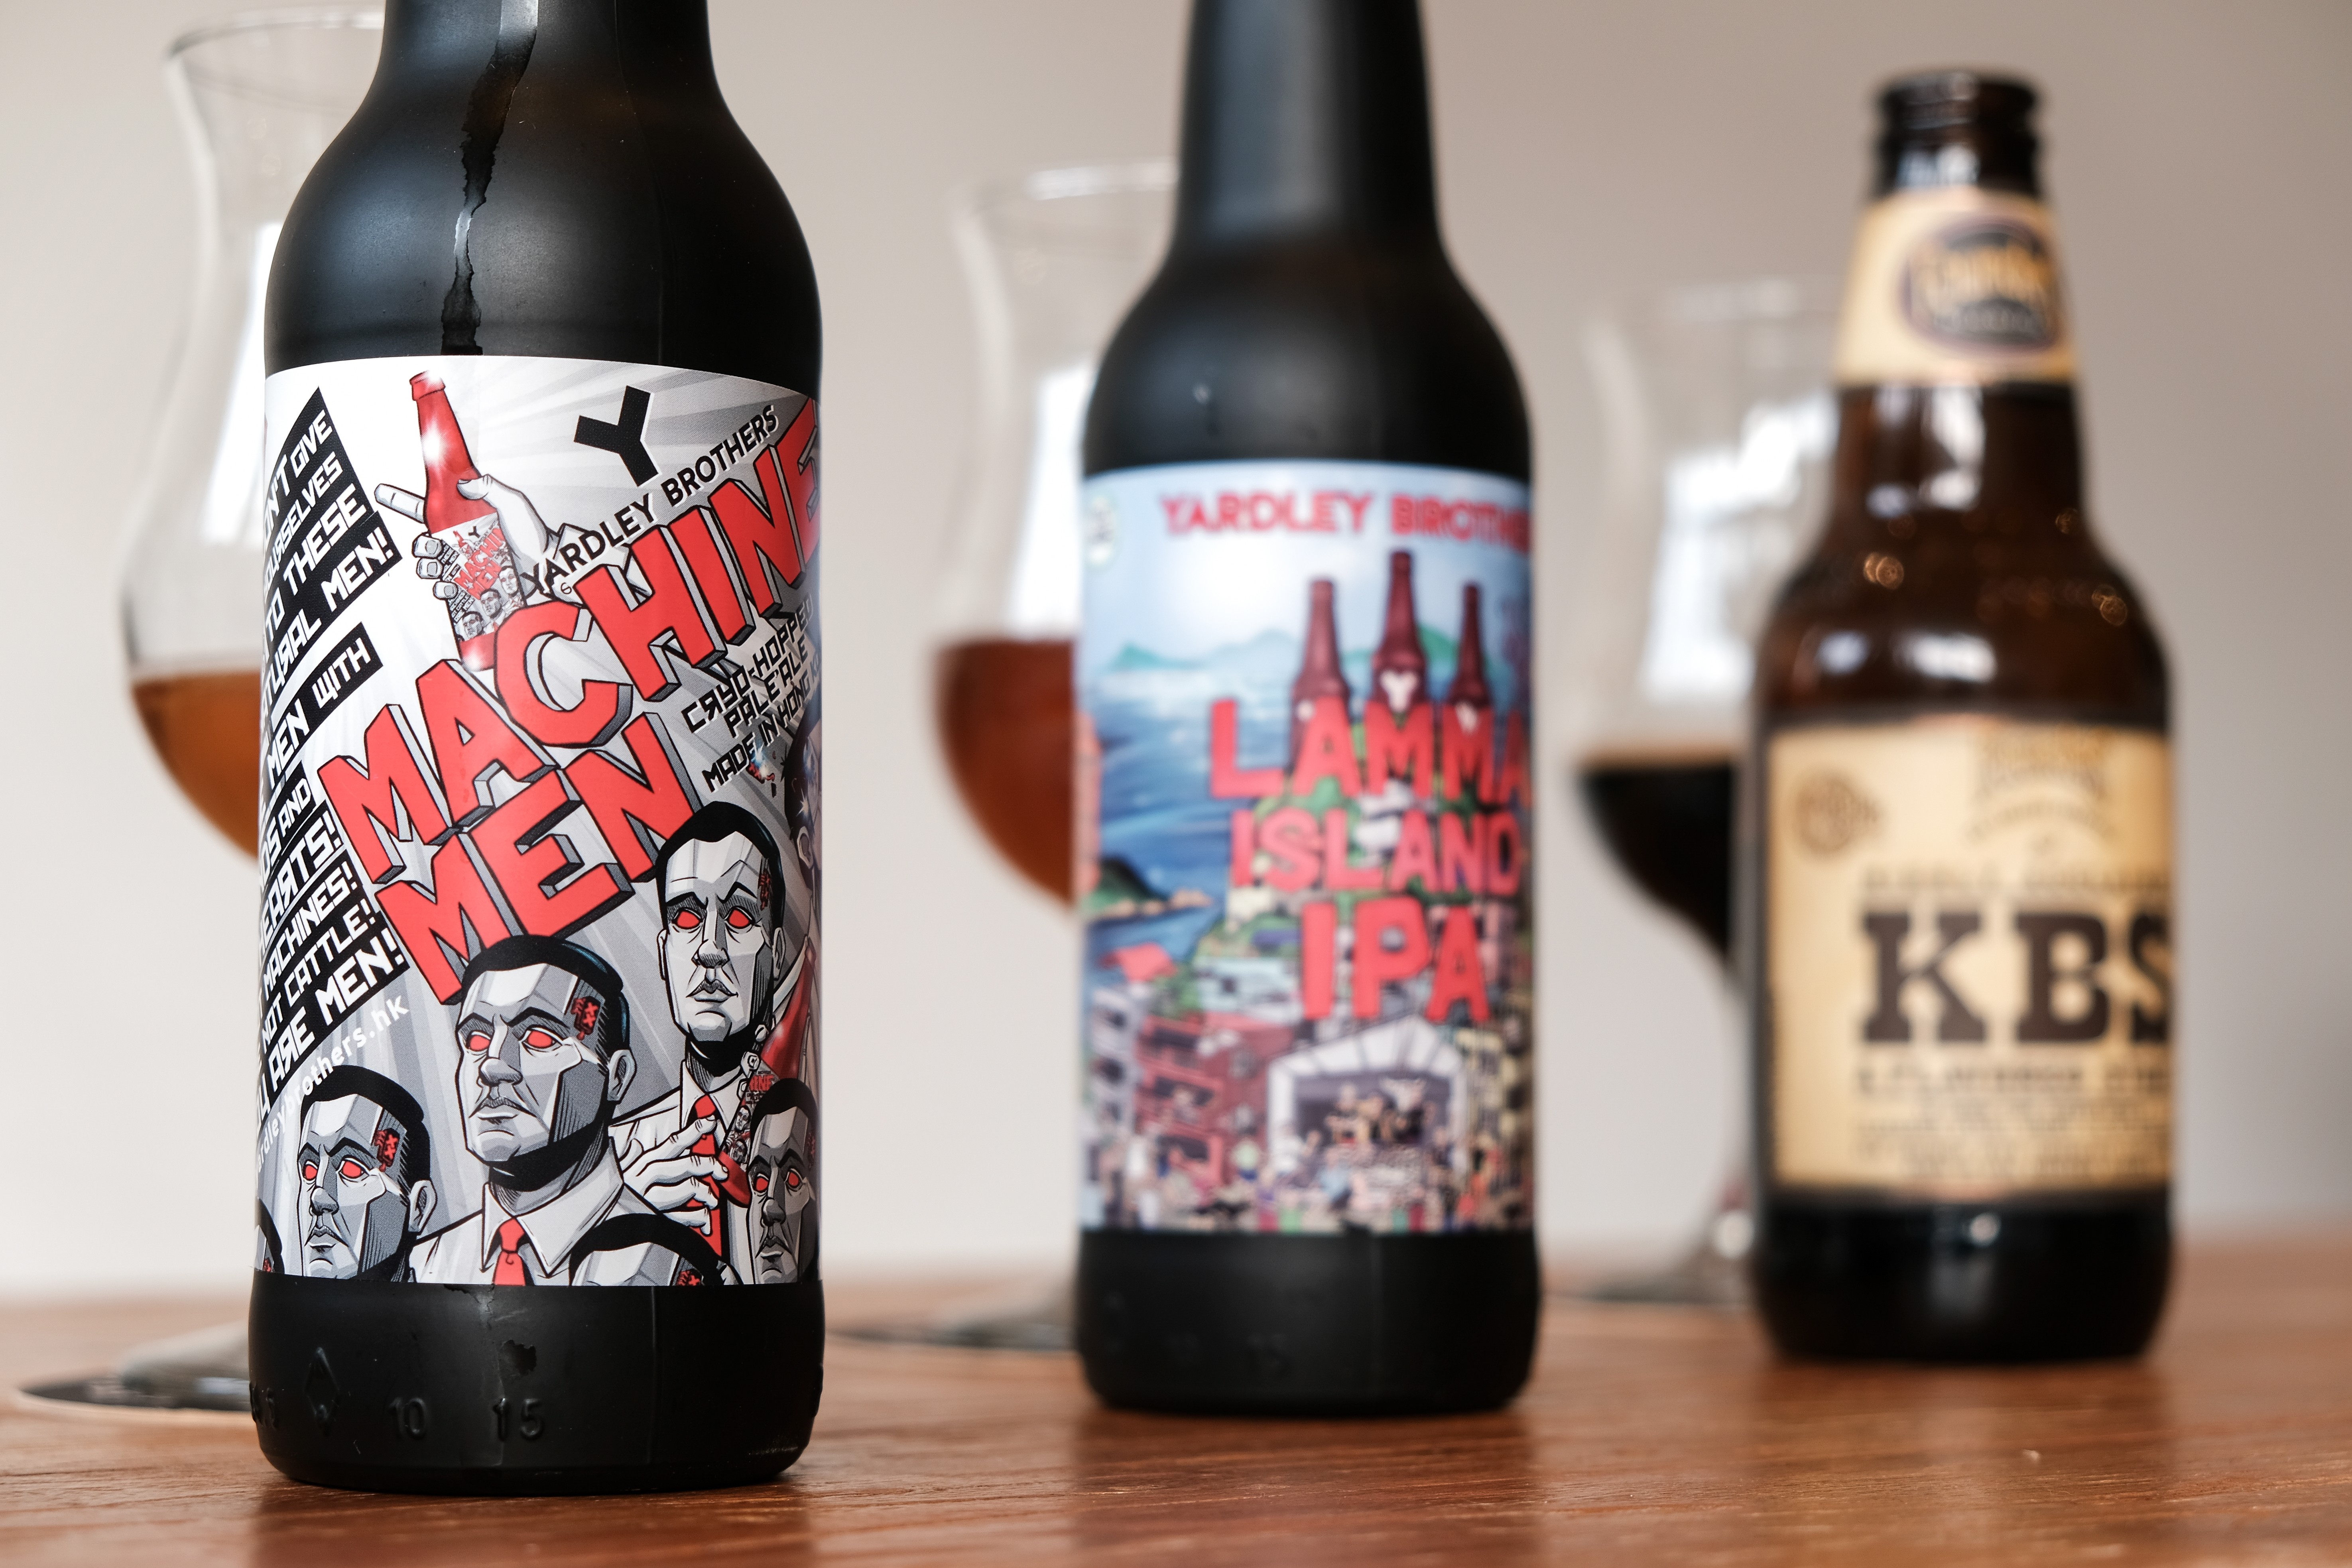 Craft beer is taking Hong Kong by storm with a few favourites, such as the Machine Men pale ale, the stout by Founders called KBS and the Lamma Island IPA.